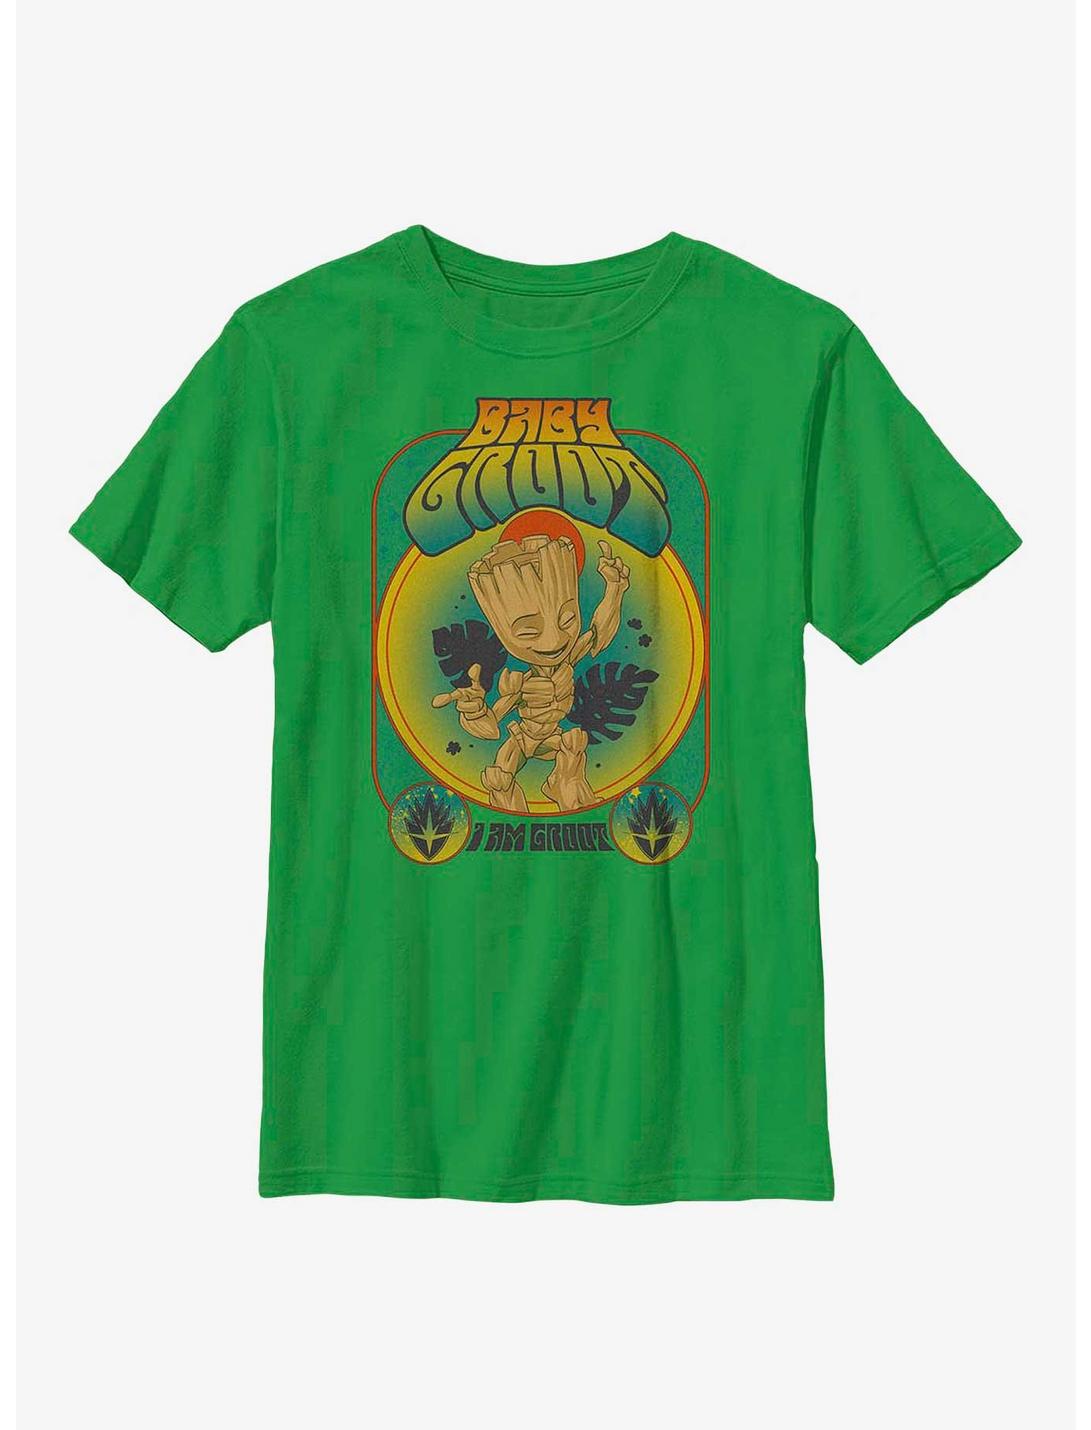 Marvel Guardians Of The Galaxy Baby Groot Youth T-Shirt, KELLY, hi-res